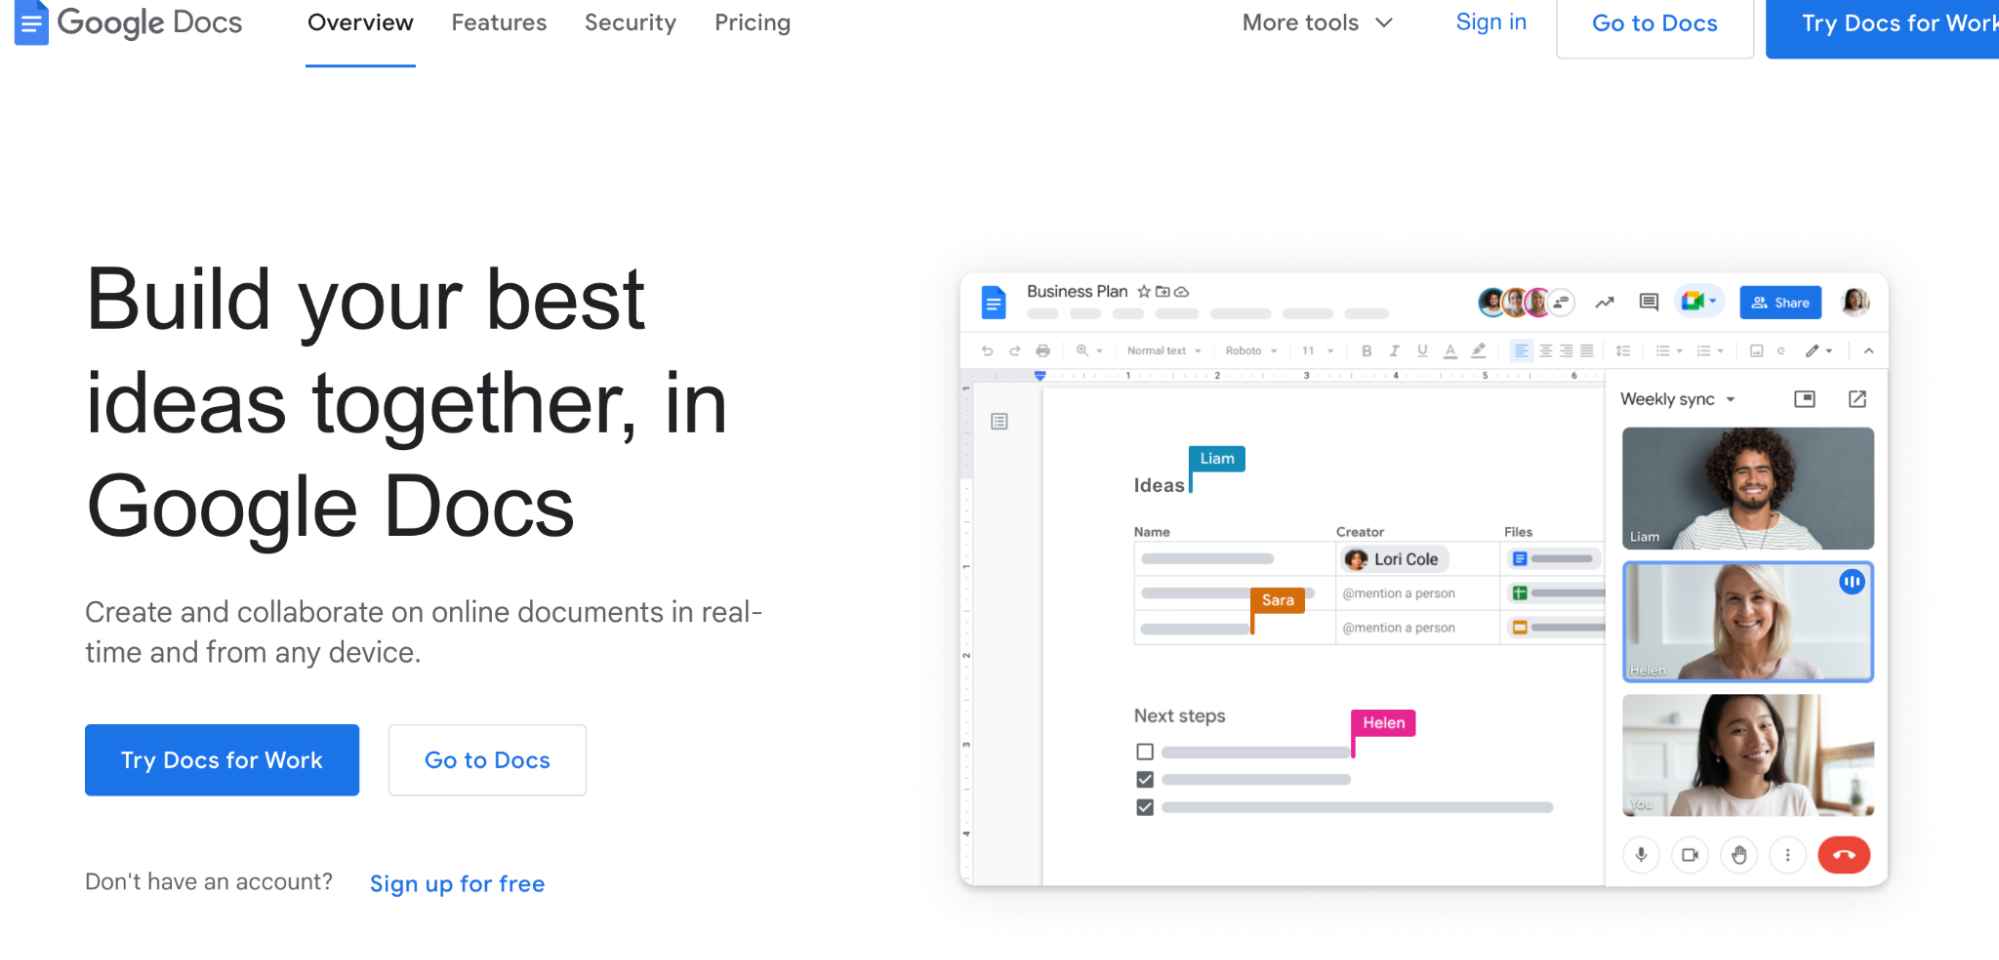 The homepage for Google Docs